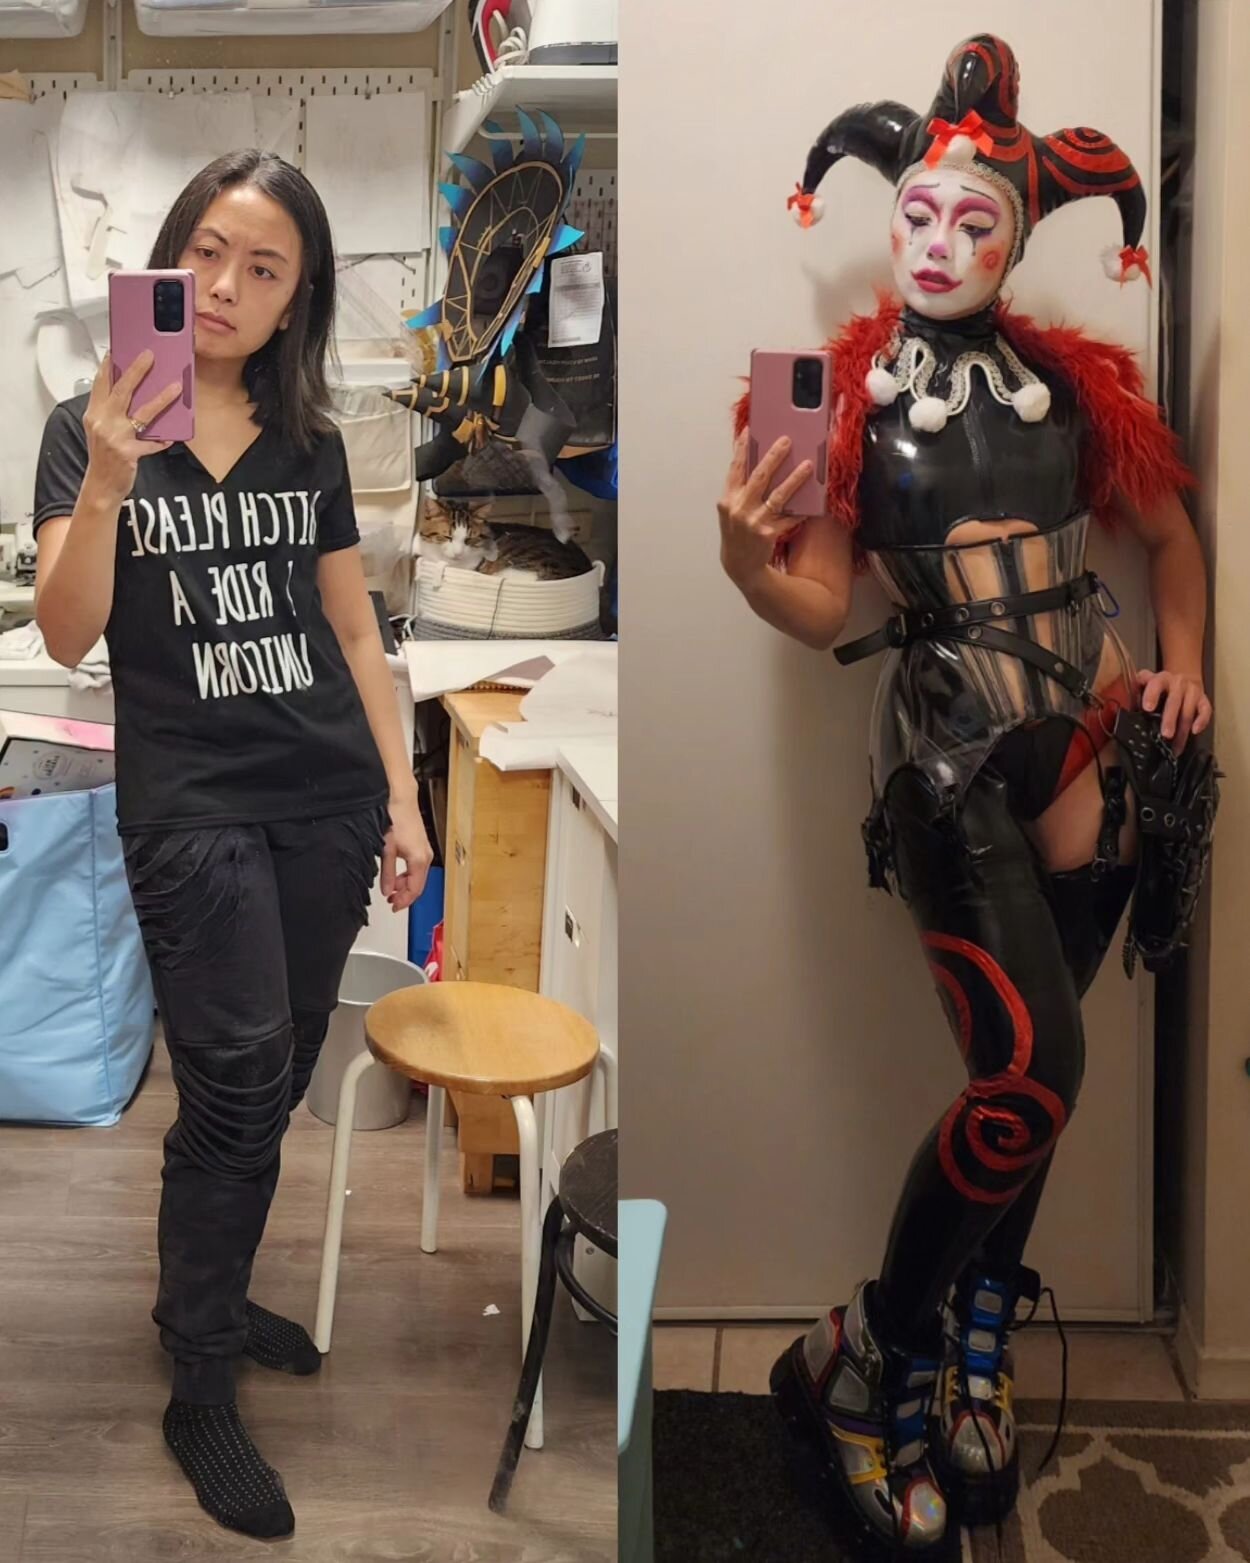 My 2023: 98% WFH bum, 2% what-do-you-call-it : Drag? Clown? Cosplay? &quot;Intentionally dressed for the occasion&quot; is the core concept. 

2% is a generous number for someone who can count the amount of times she got to go out for leisure 🫠

Nee